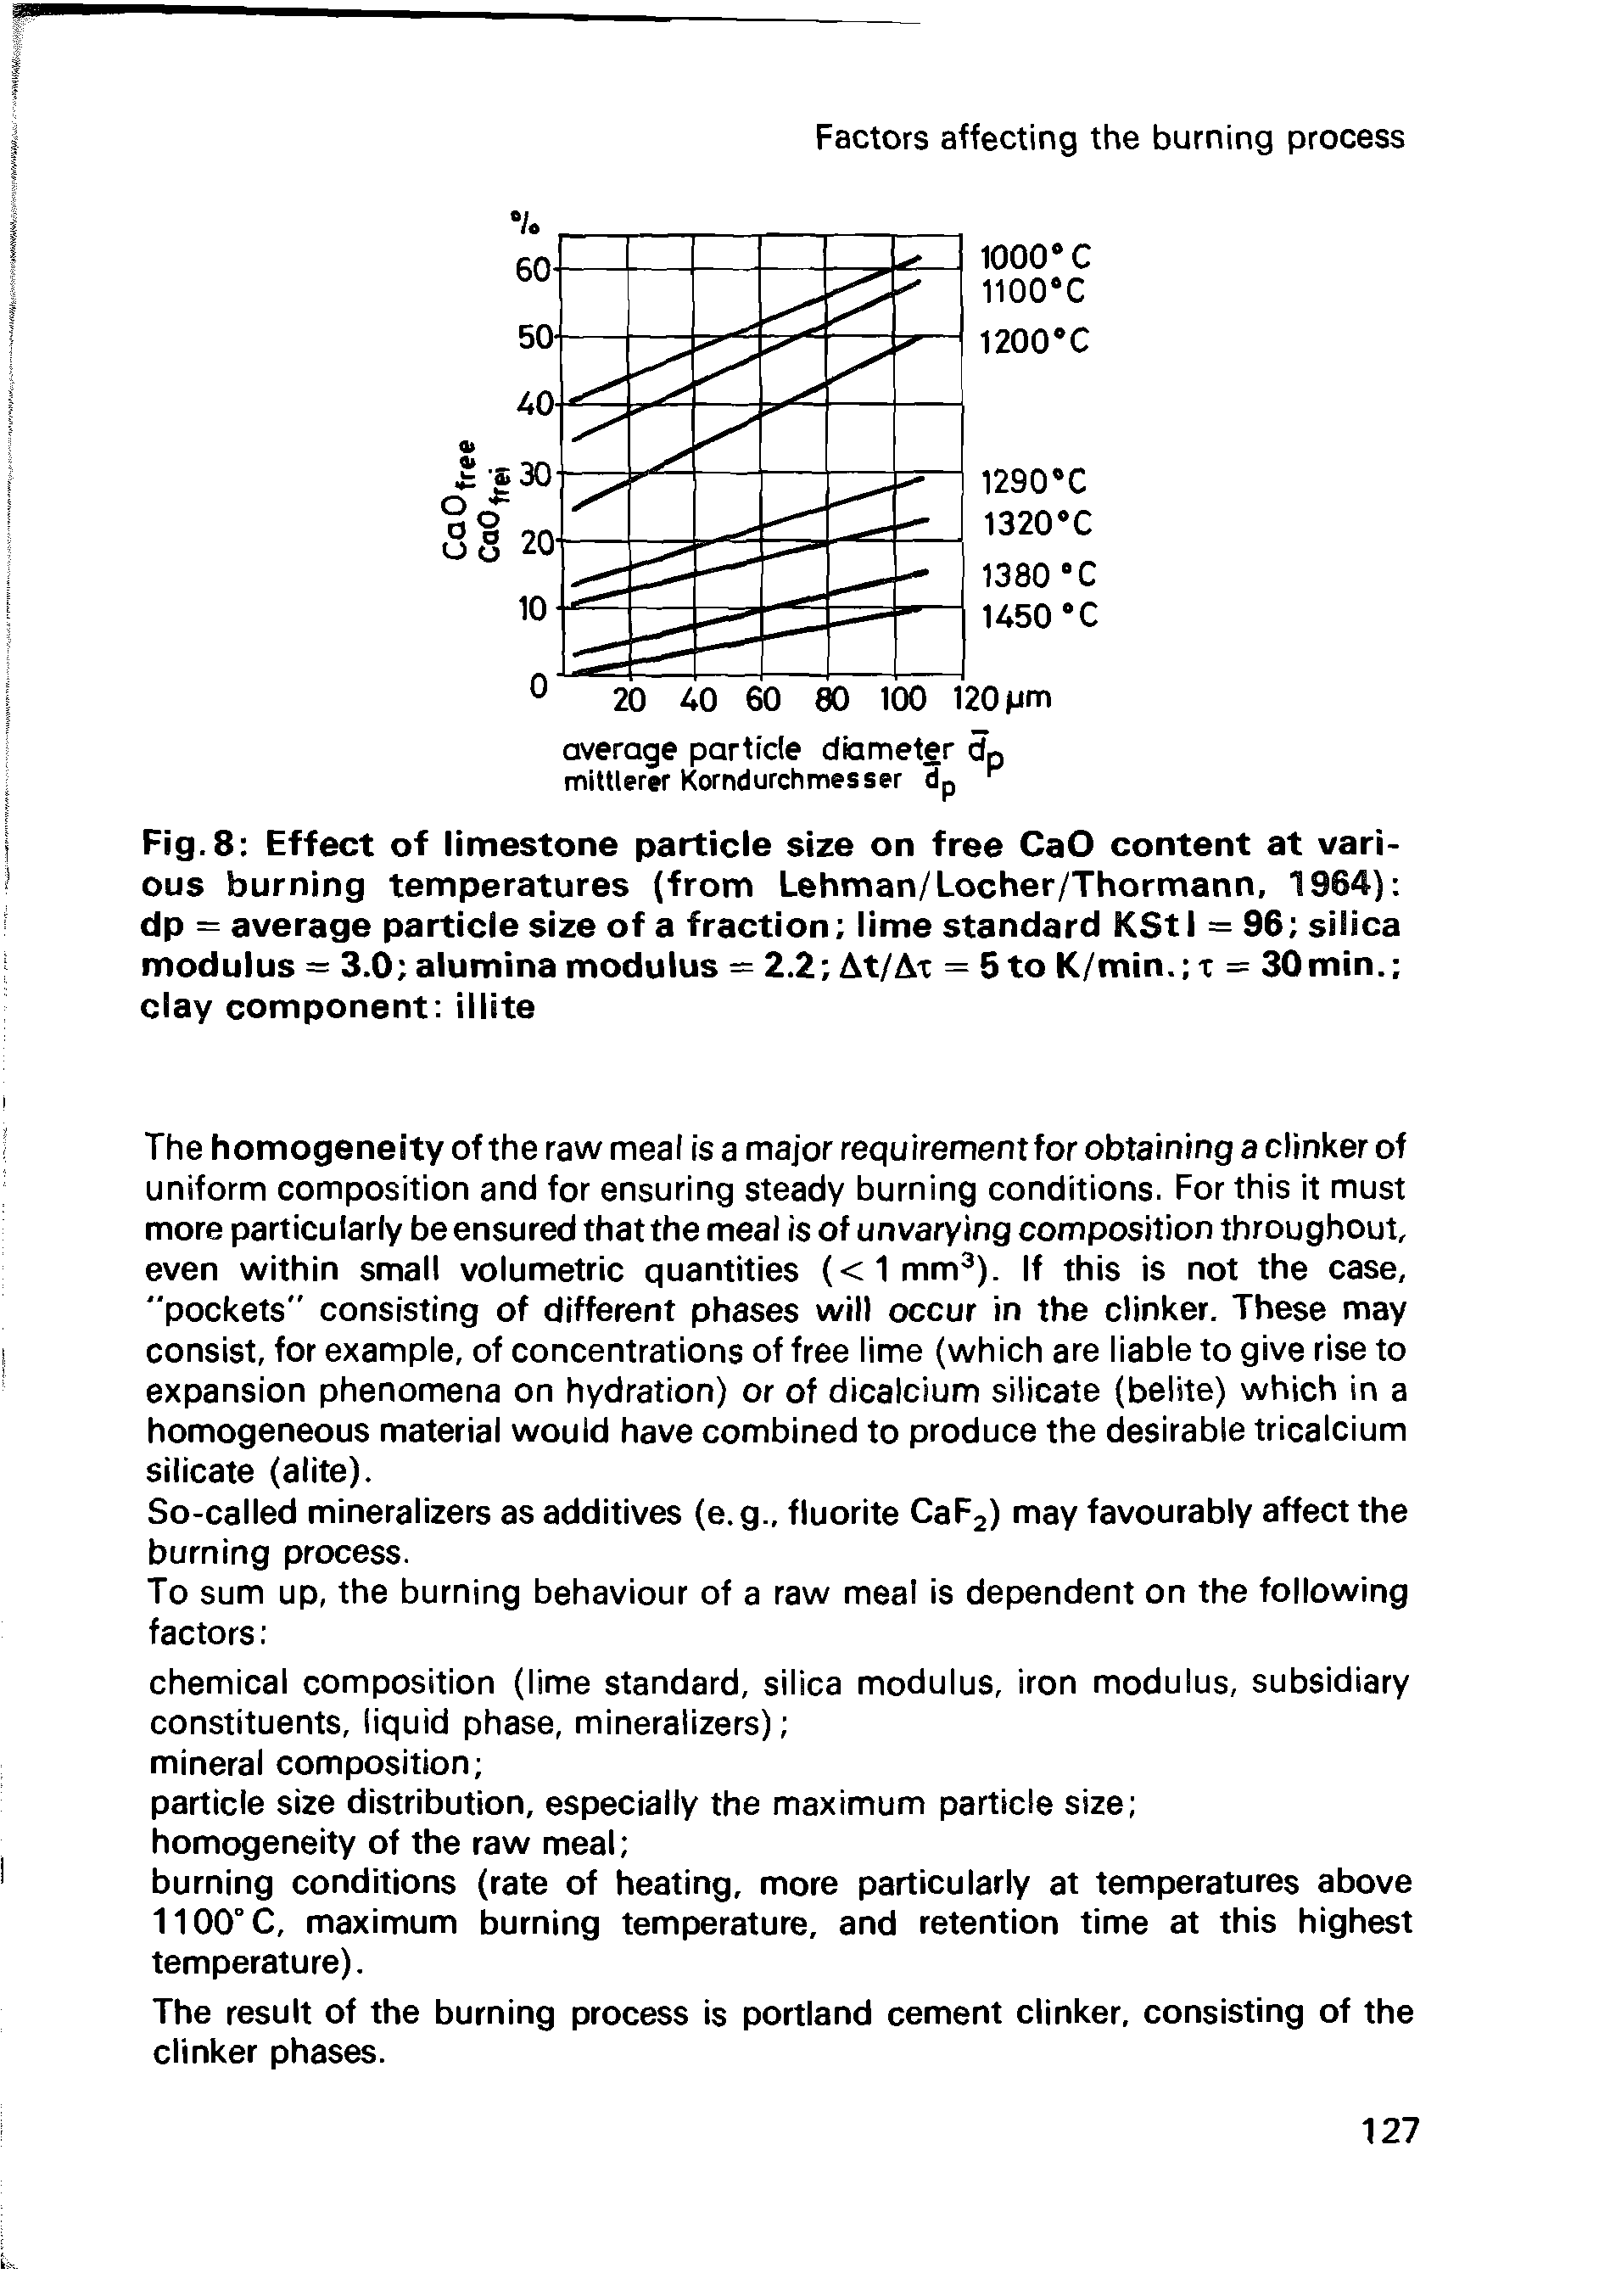 Fig. 8 Effect of limestone particle size on free CaO content at various burning temperatures (from Lehman/Locher/Thormann, 1964) dp — average particle size of a fraction lime standard KStI = 96 silica modulus = 3.0 alumina modulus = 2.2 At/At = 5to K/min. t = 30min. clay component illite...